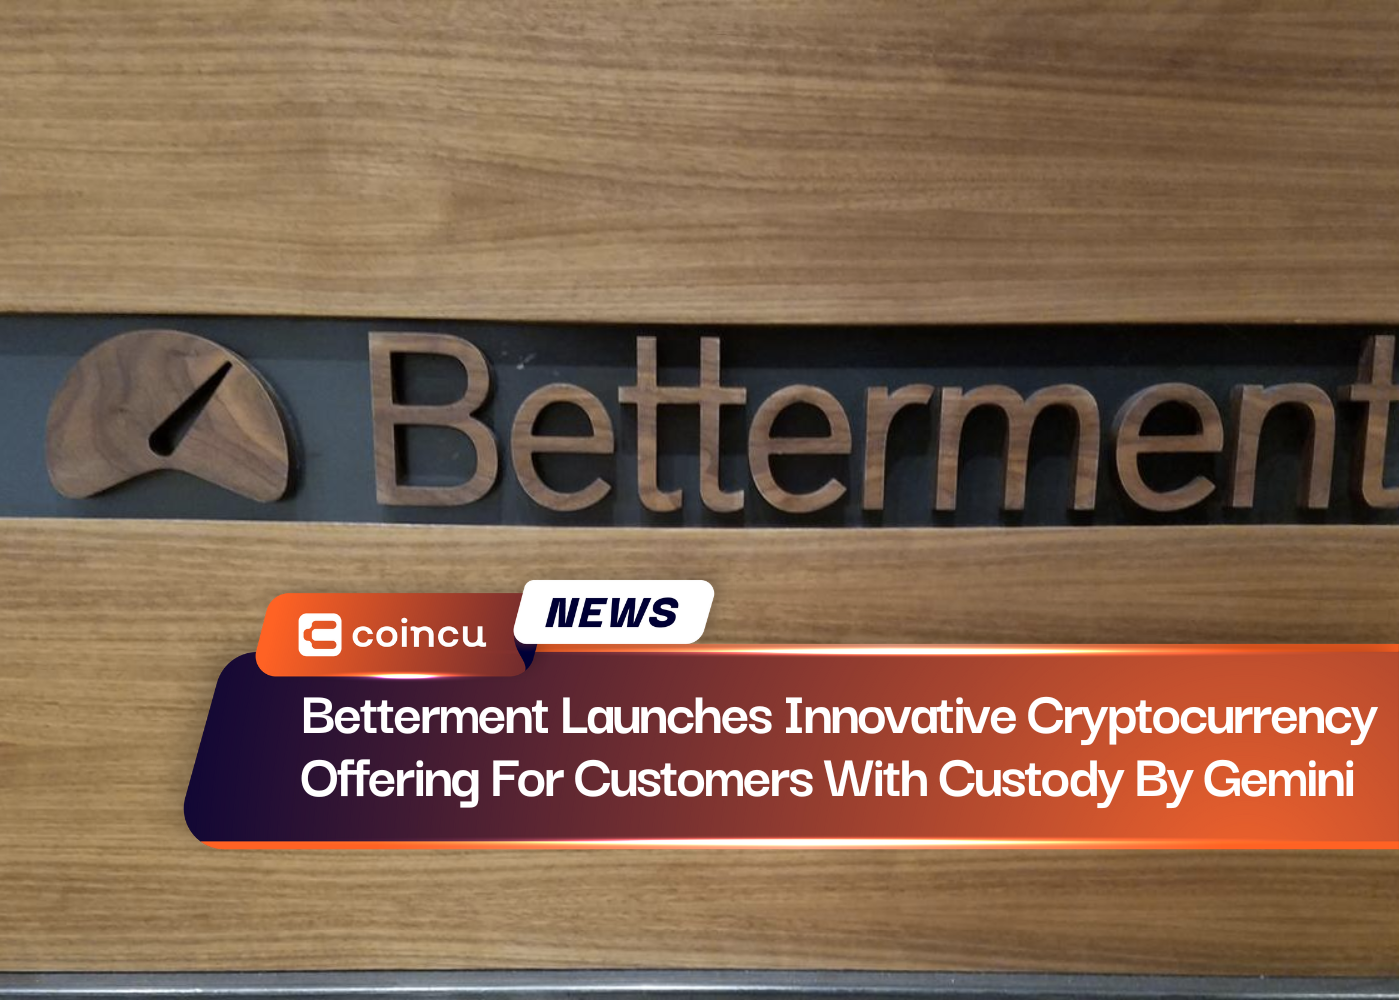 Betterment Launches Innovative Cryptocurrency Offering For Customers With Custody By Gemini